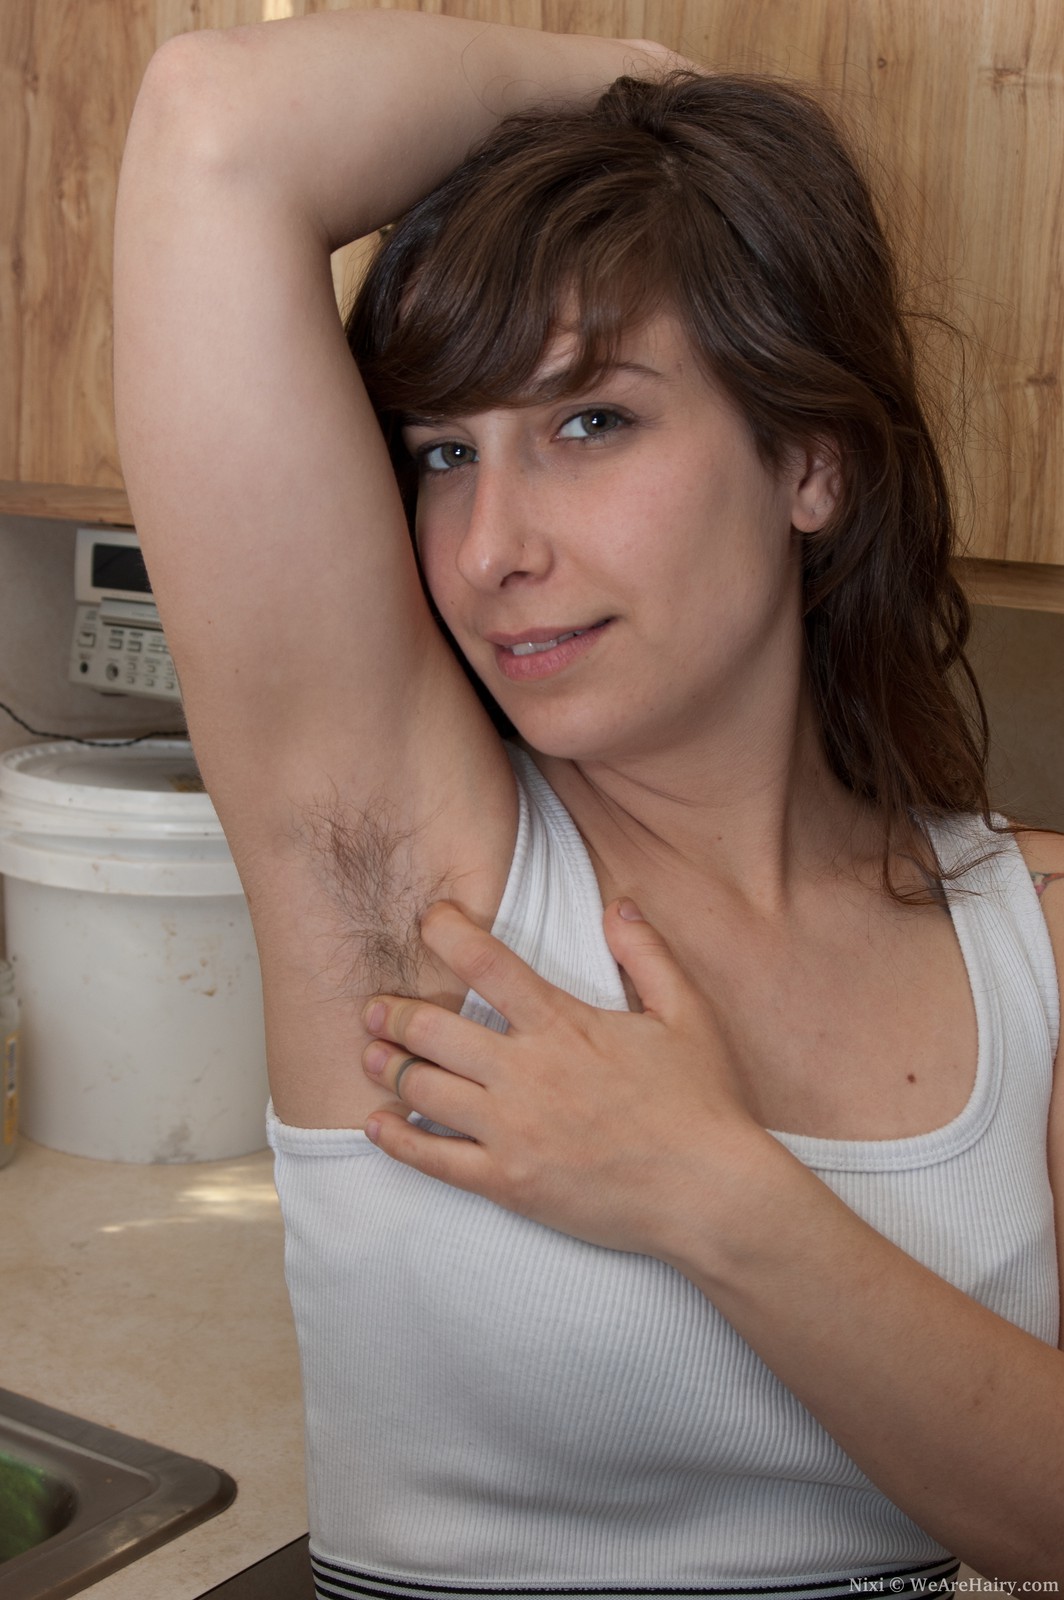 hairy-nixi-gets-frisky-in-the-kitchen3.jpg